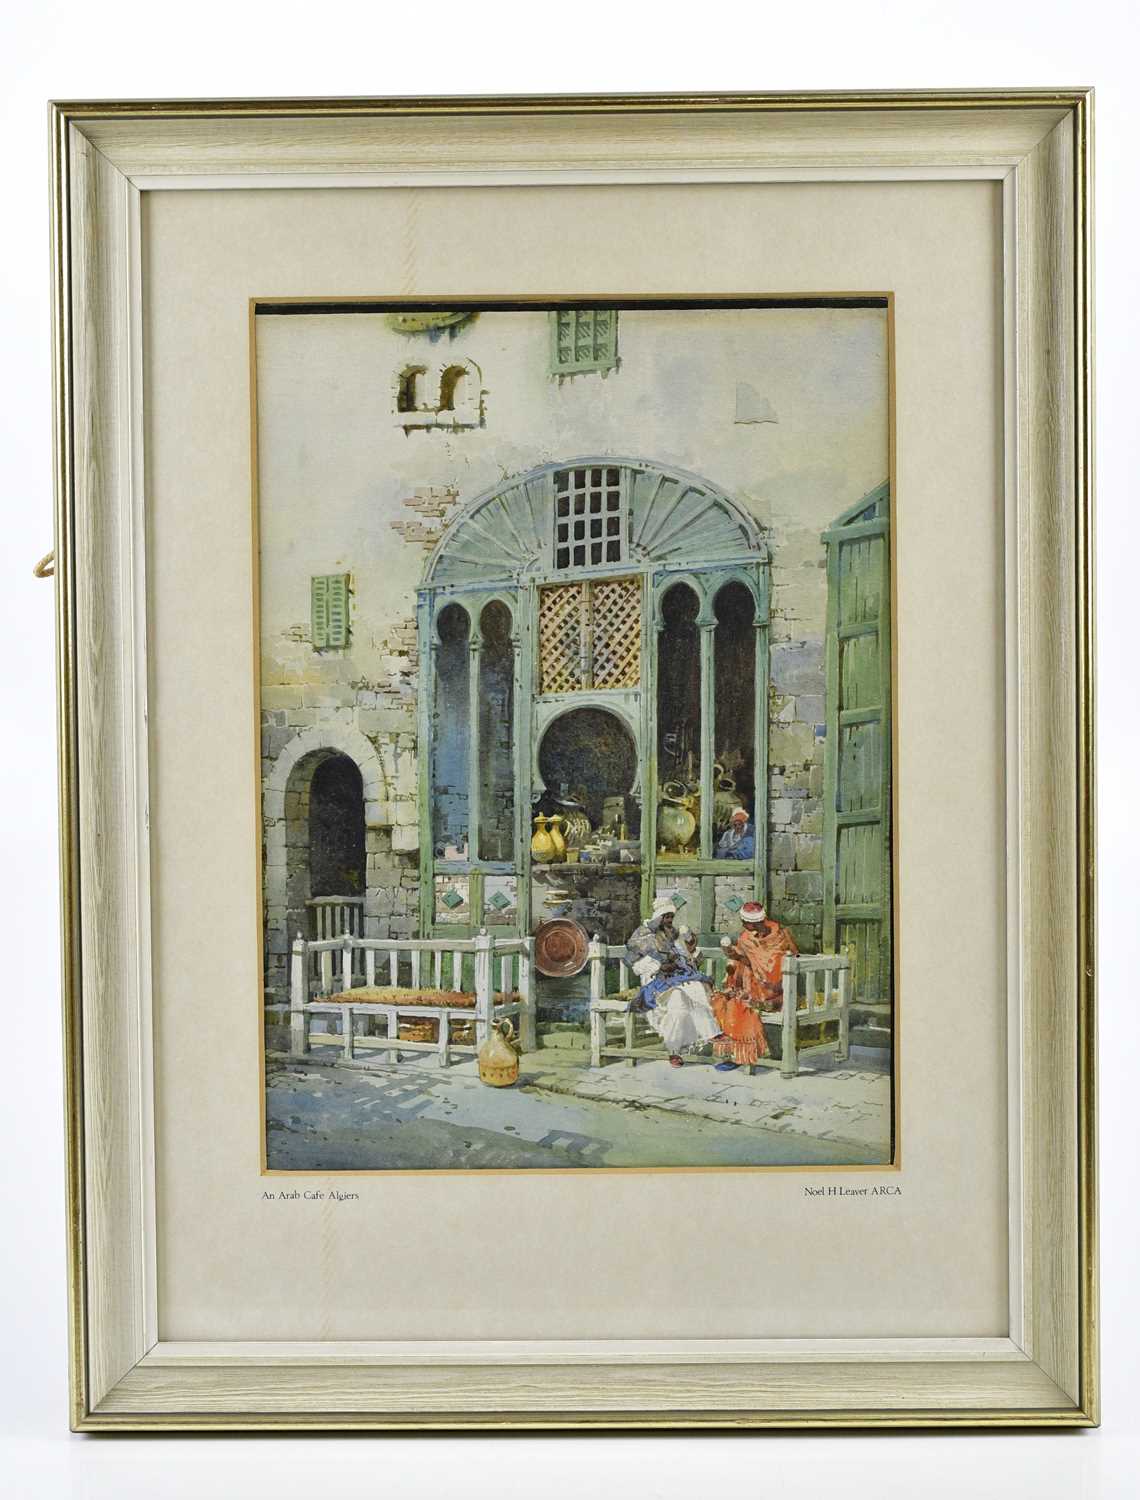 NOEL HENRY LEAVER A.R.C.A. (1889-1951); watercolour, 'An Arab cafe Algiers', 37x26.5cm, framed and